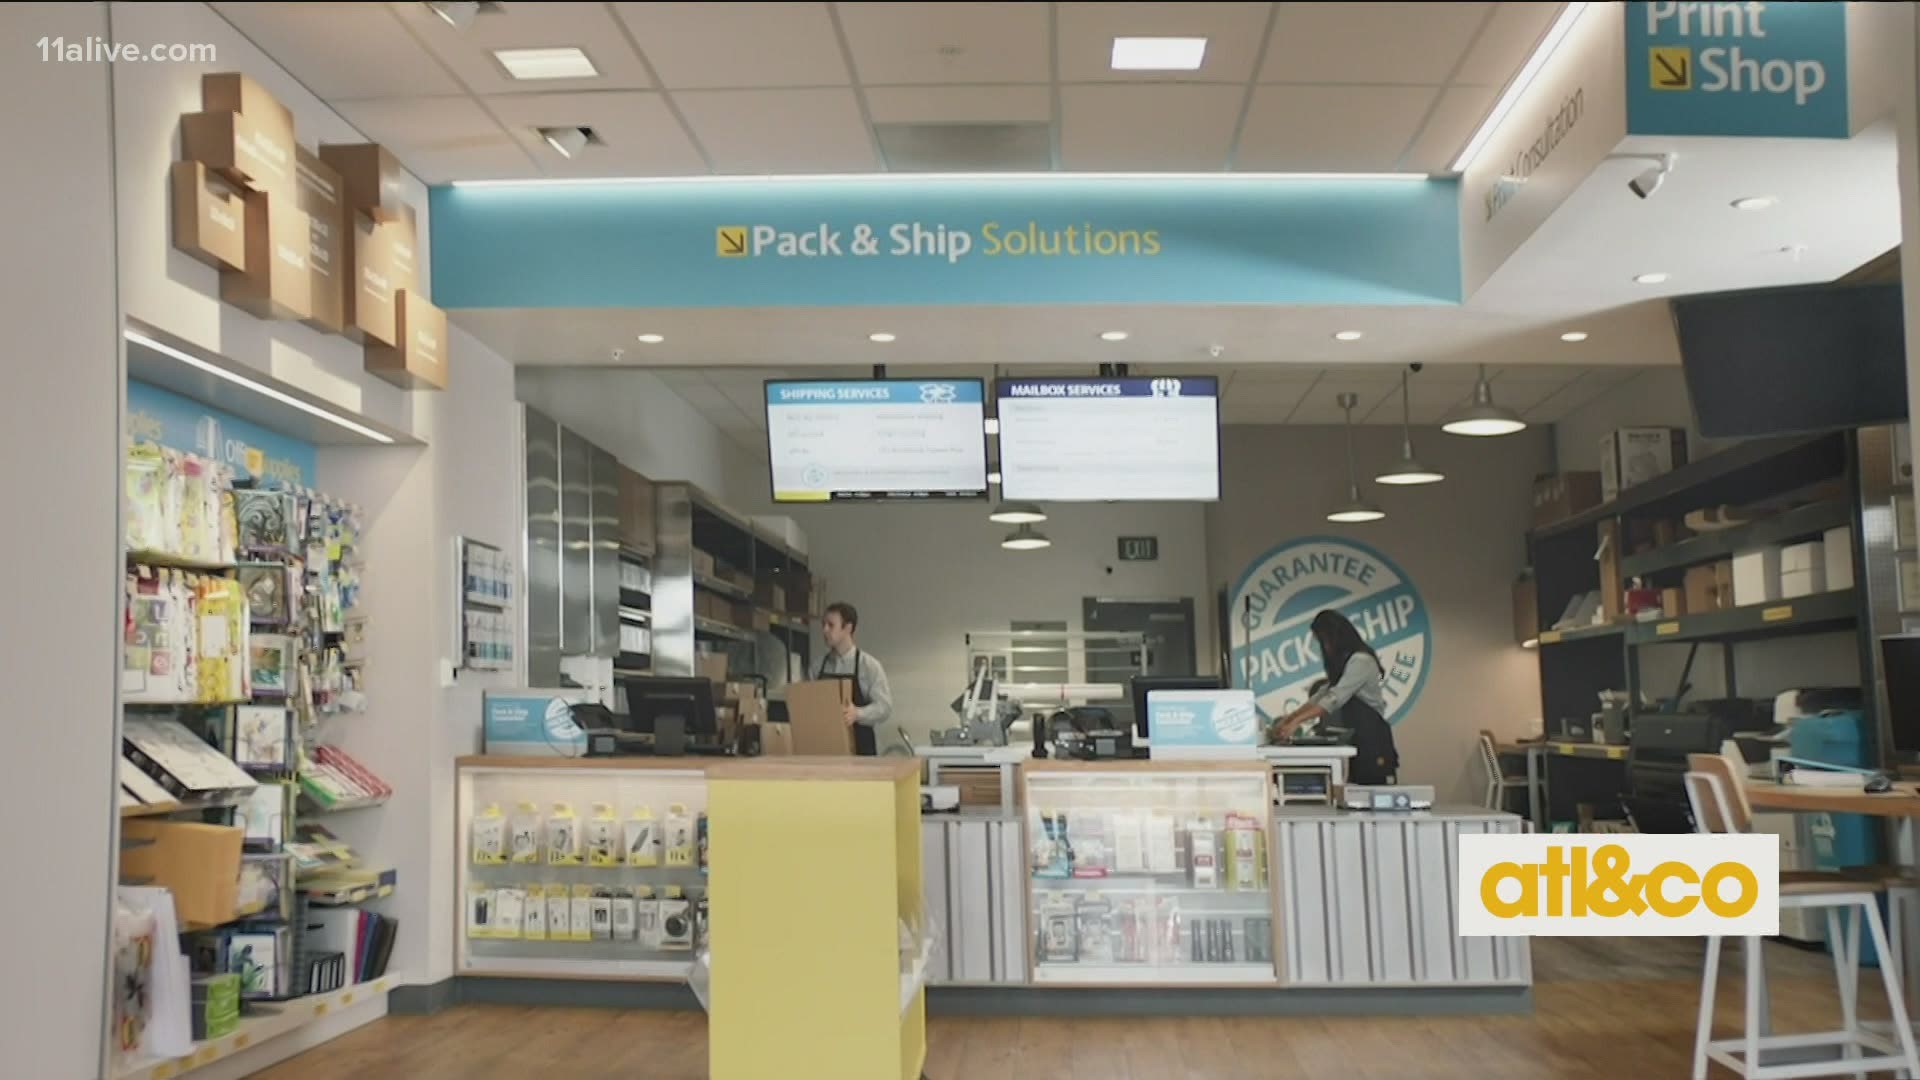 Learn about The UPS Store's brand new in-center experience to adapt to customers' new needs.